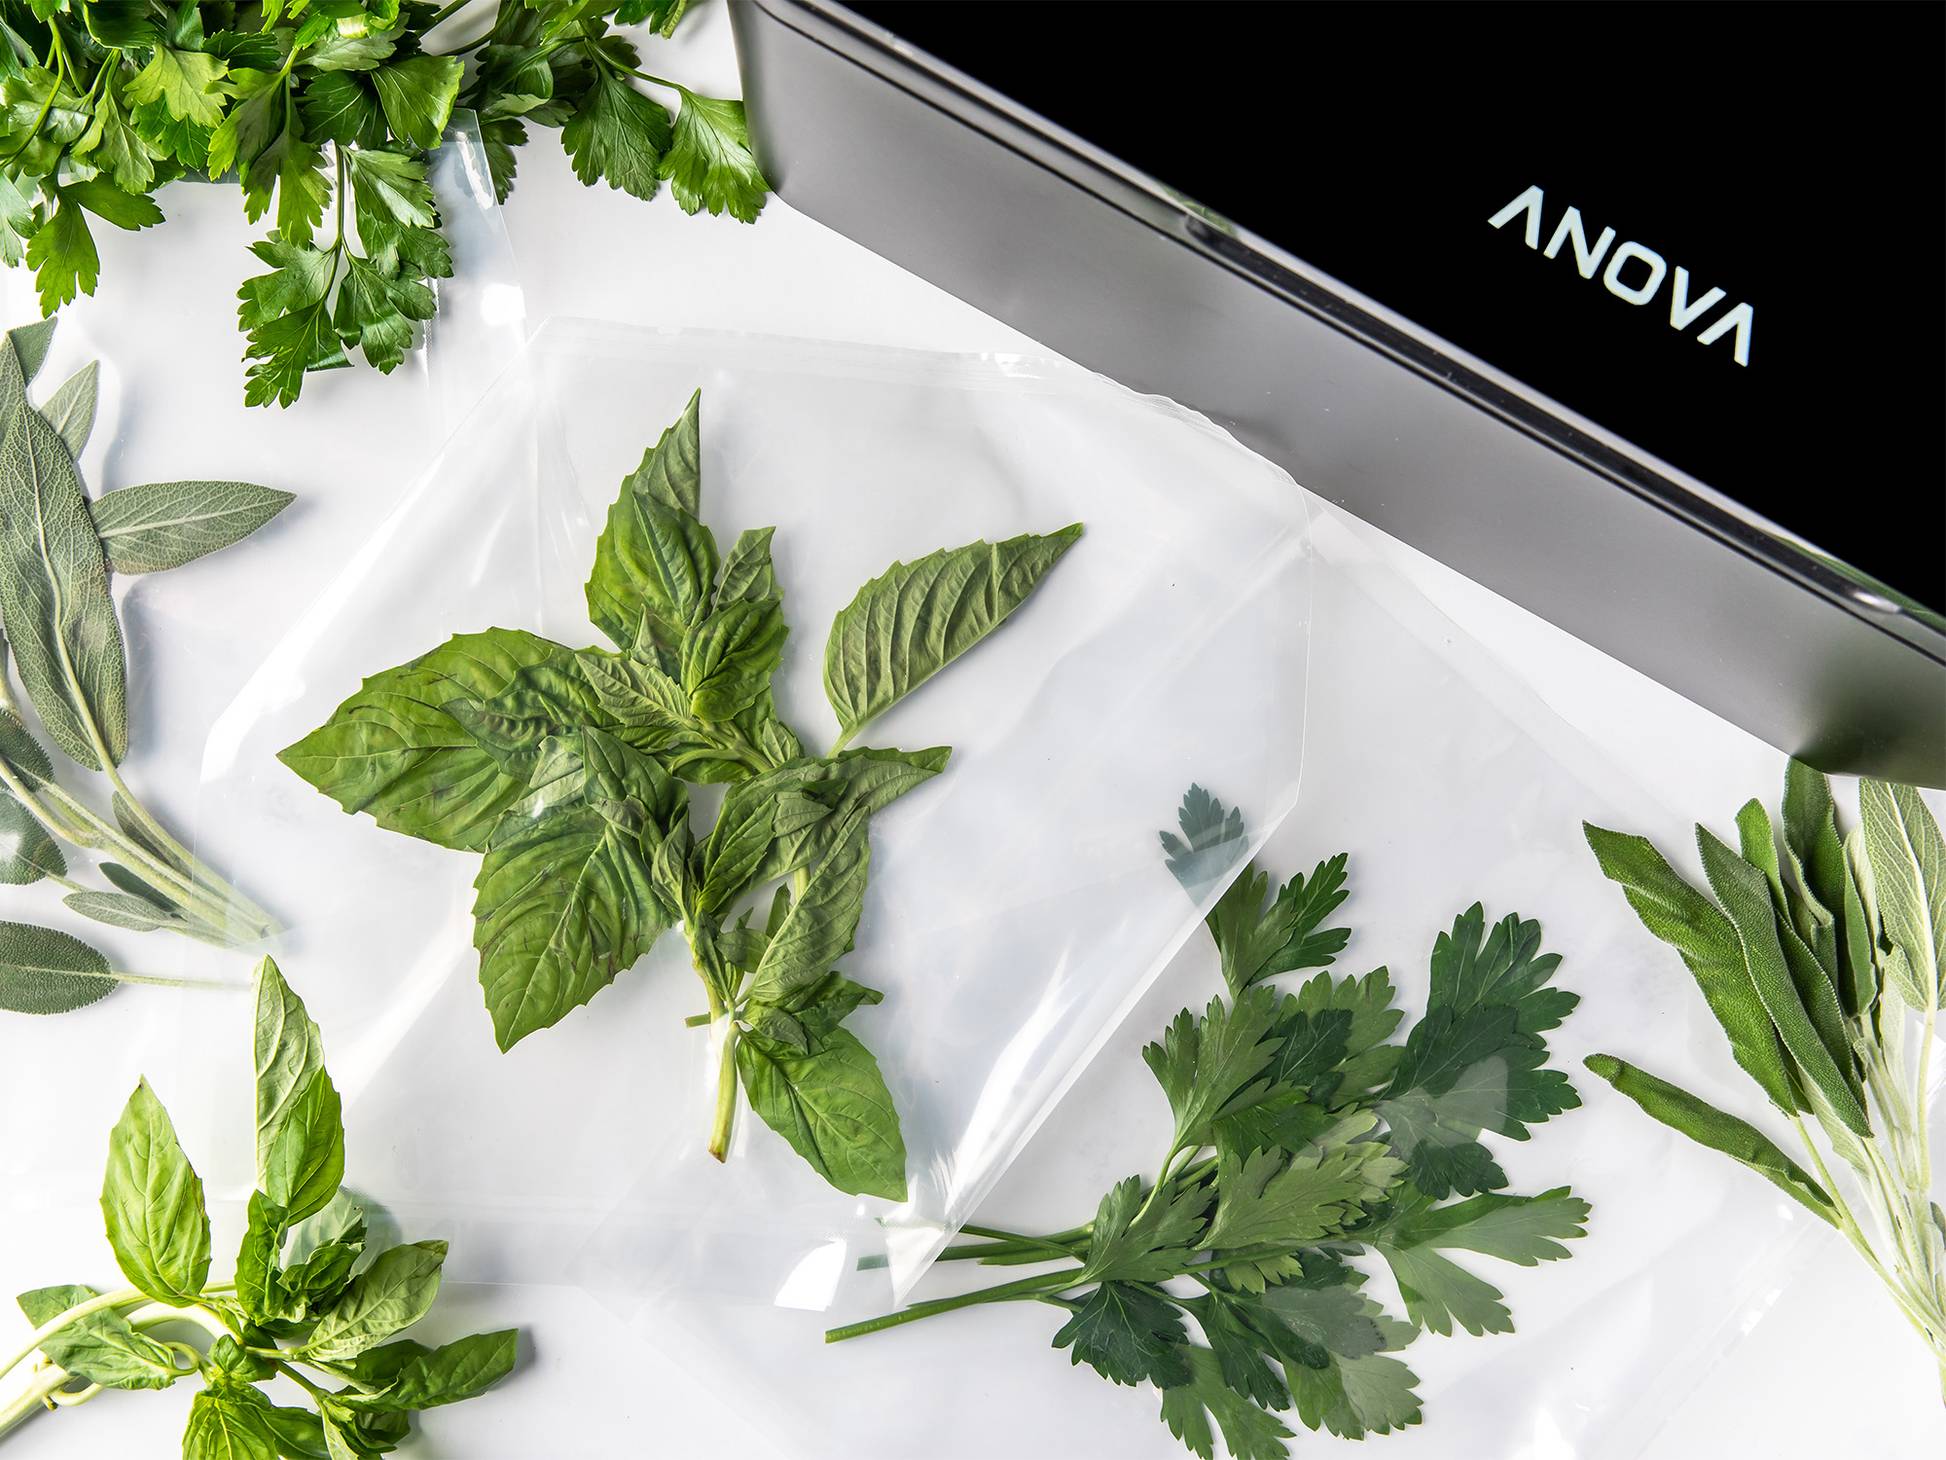 Anova's Chamber Vacuum Sealer Is a Game-Changing Tool for Home Cooking